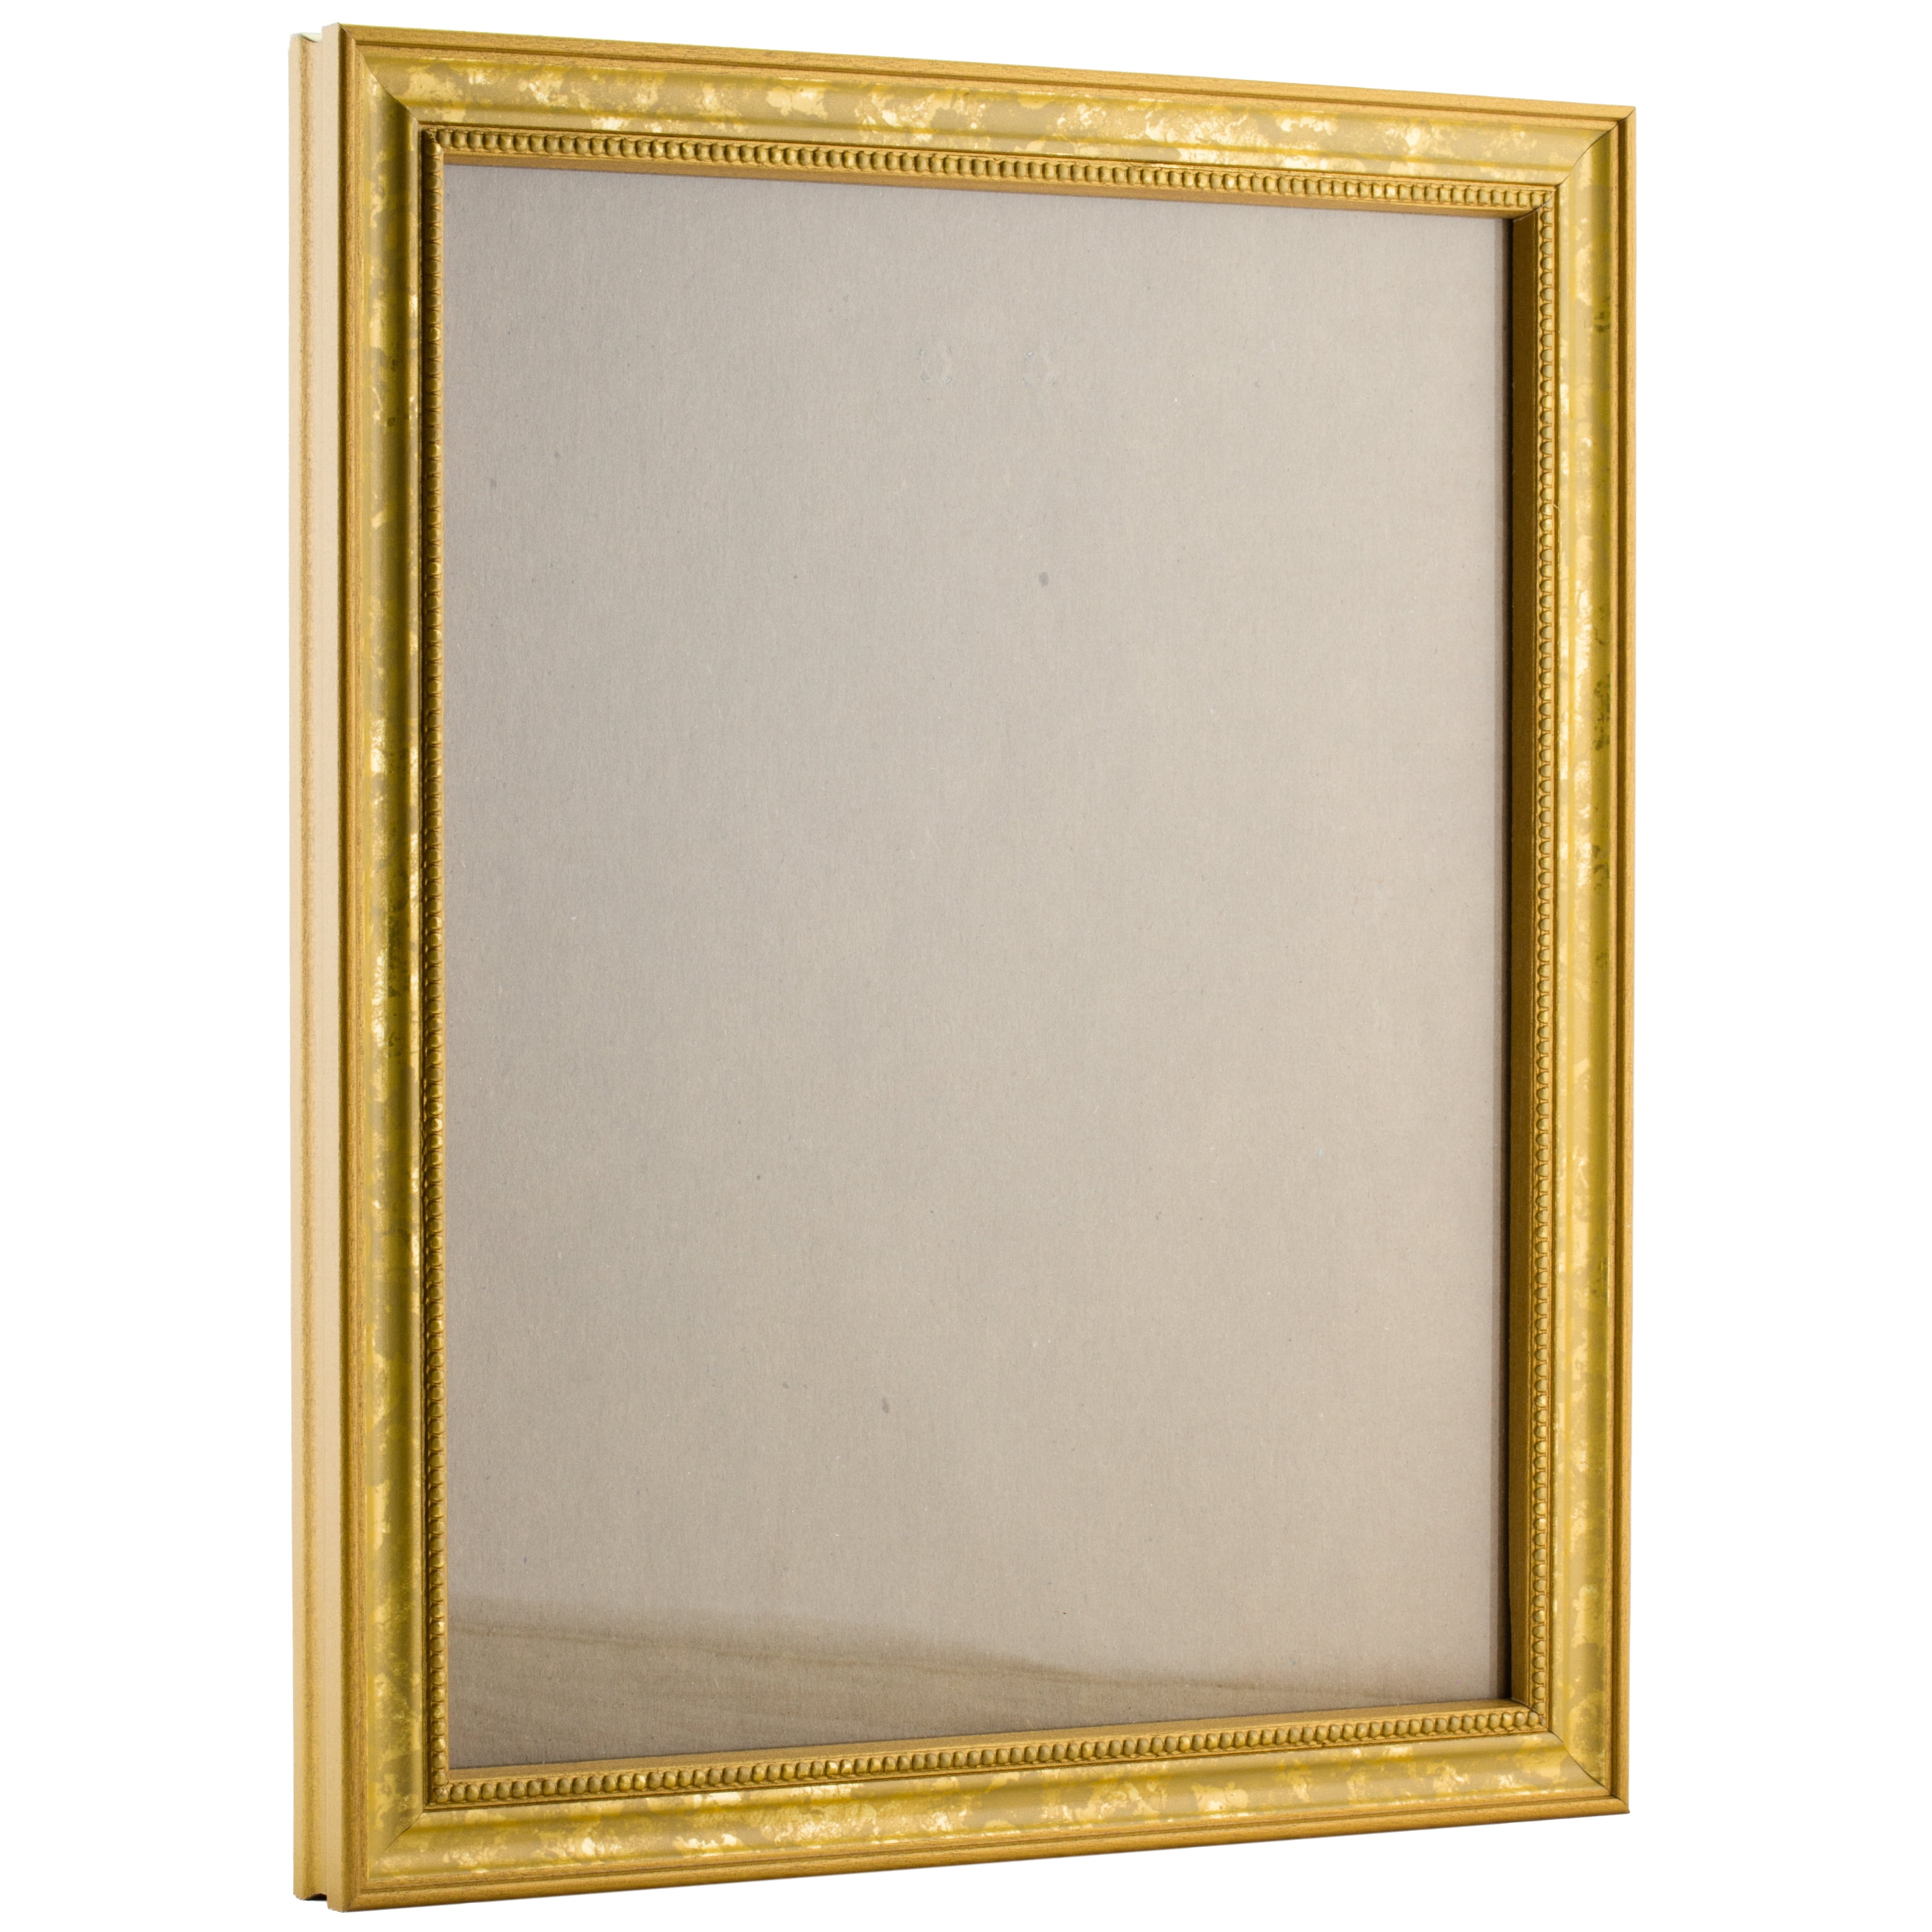 3 Wide Craig Frames Sonora 18x24 Inch Aged Gold and Black Picture Frame 213072011824